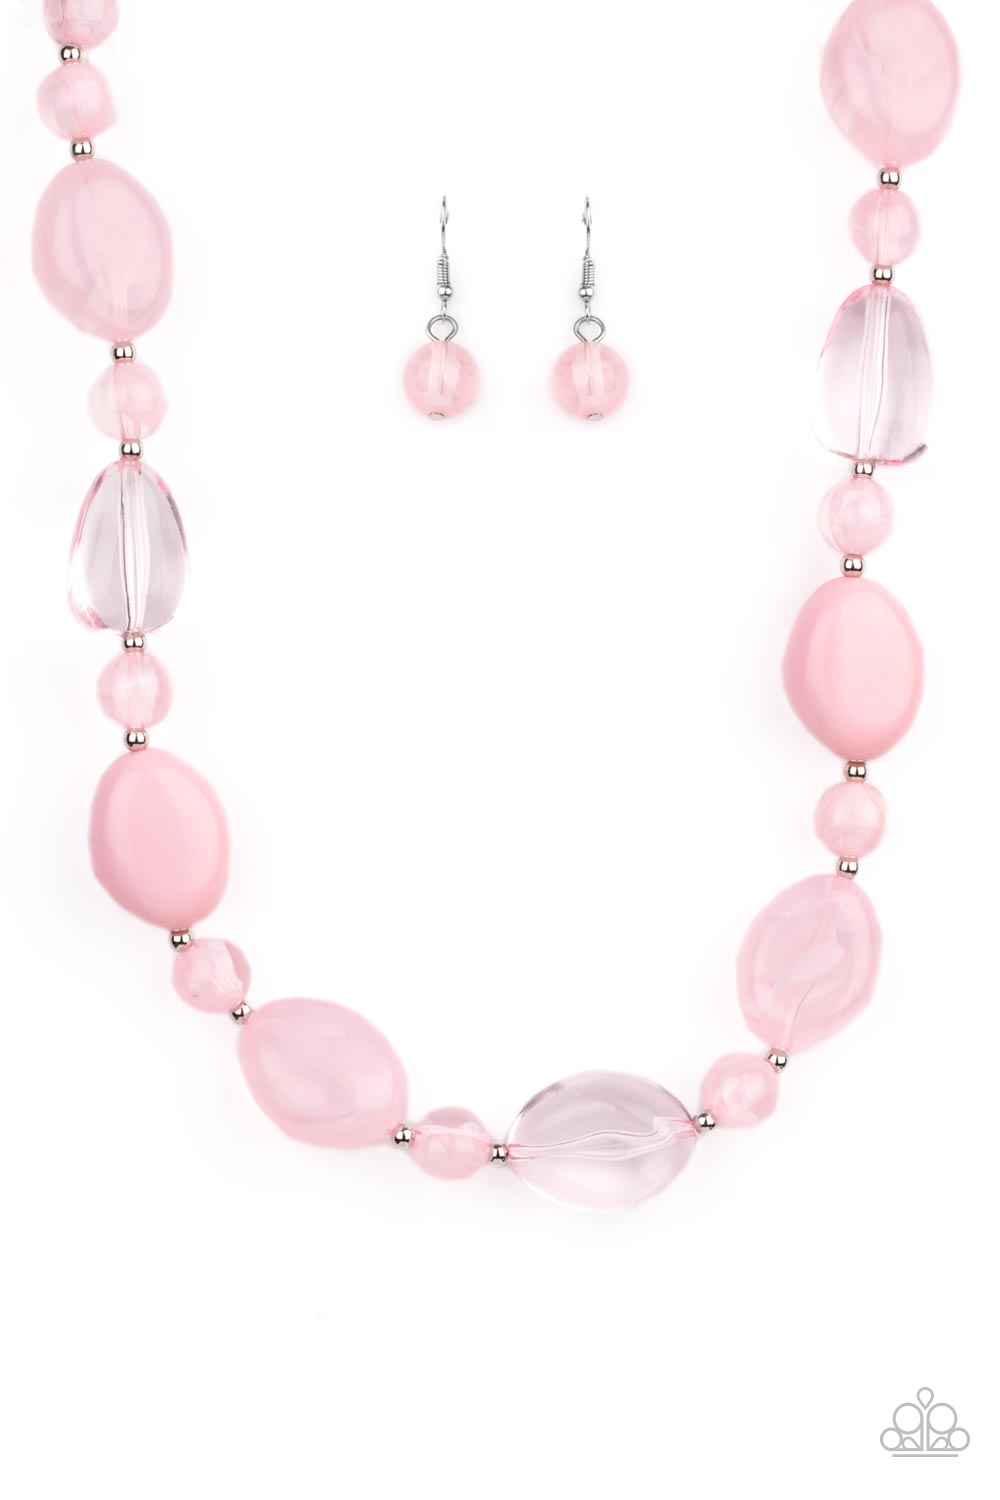 five-dollar-jewelry-staycation-stunner-pink-necklace-paparazzi-accessories